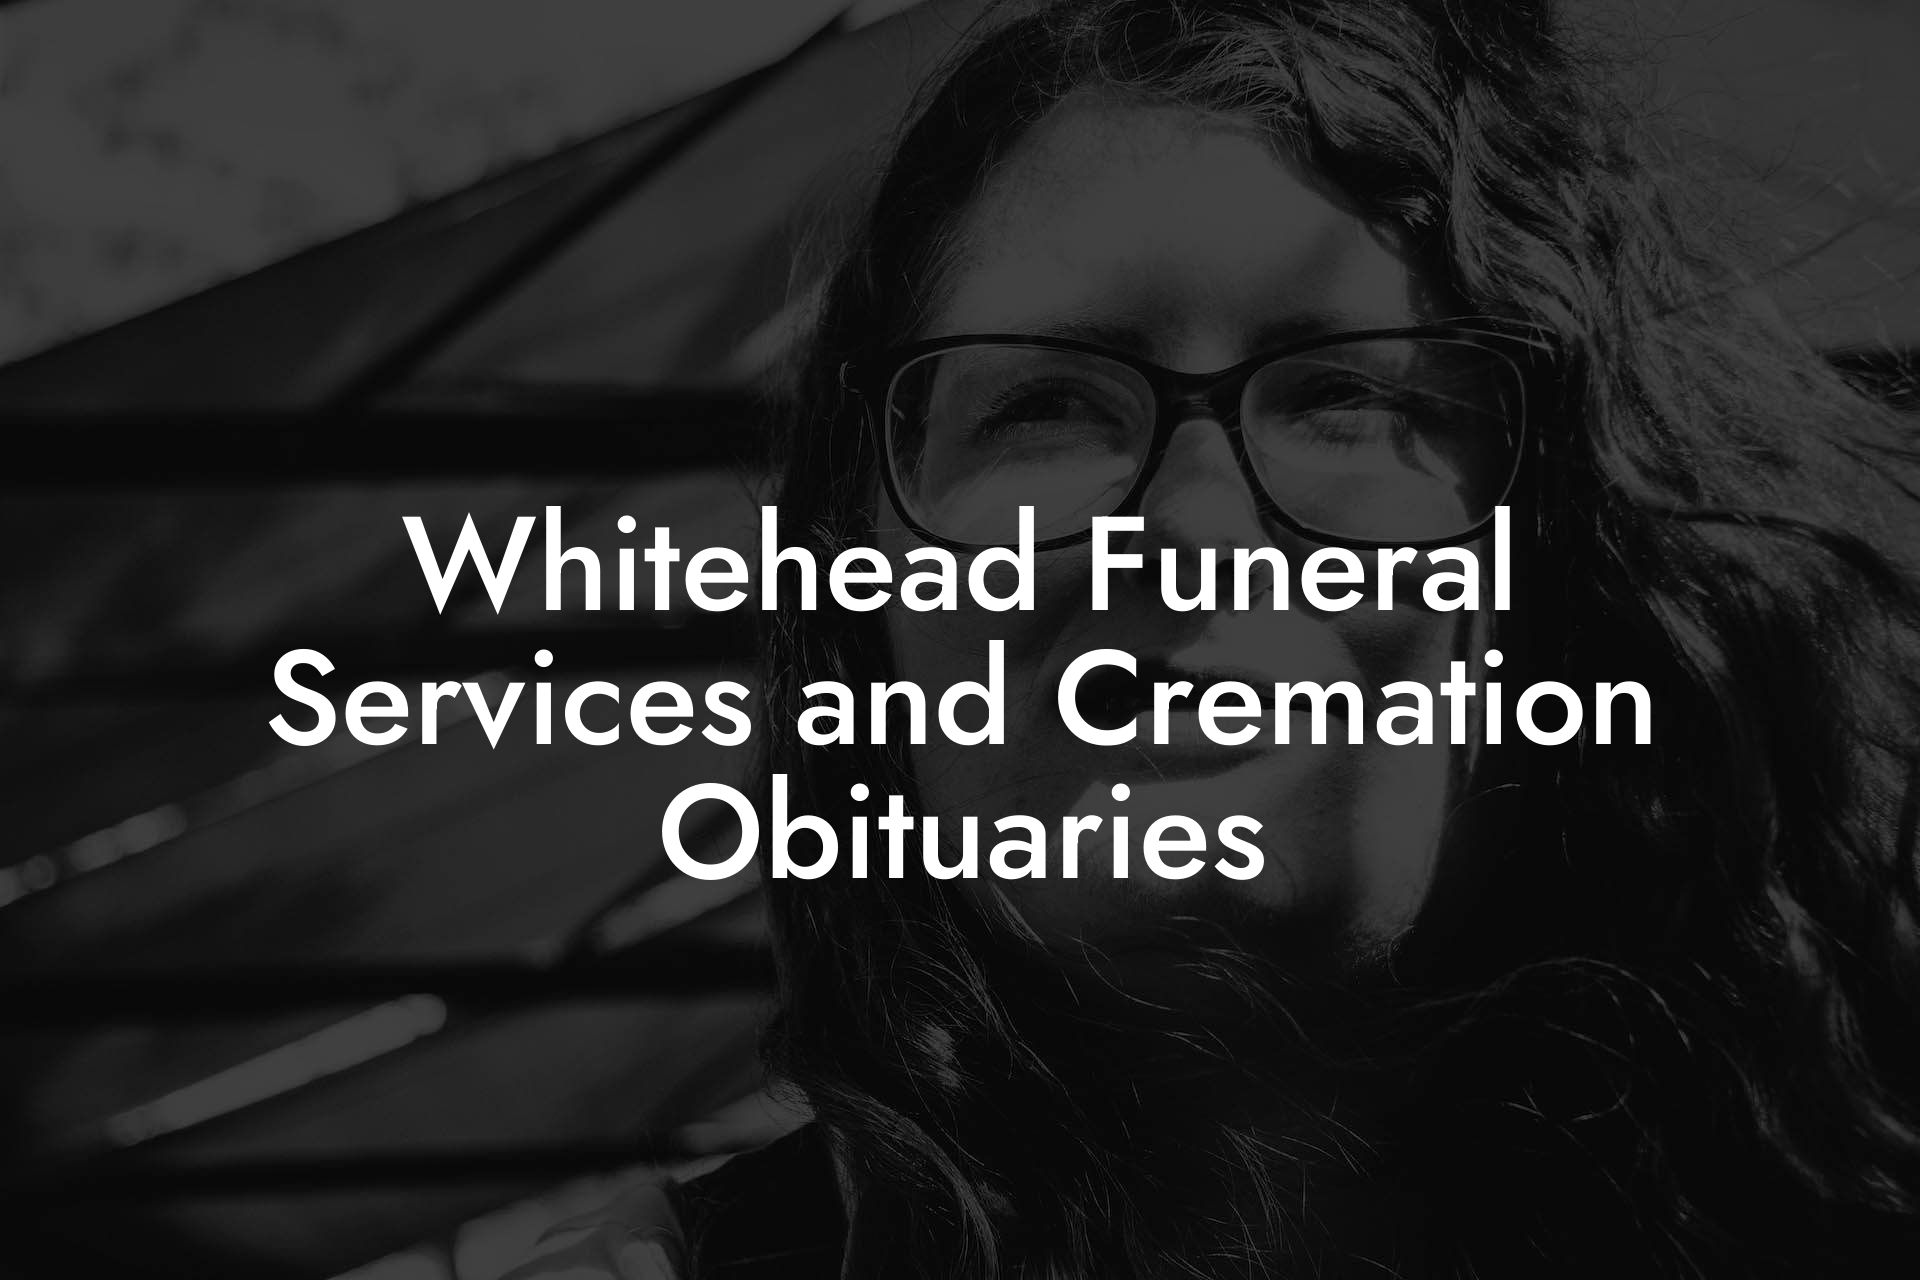 Whitehead Funeral Services and Cremation Obituaries